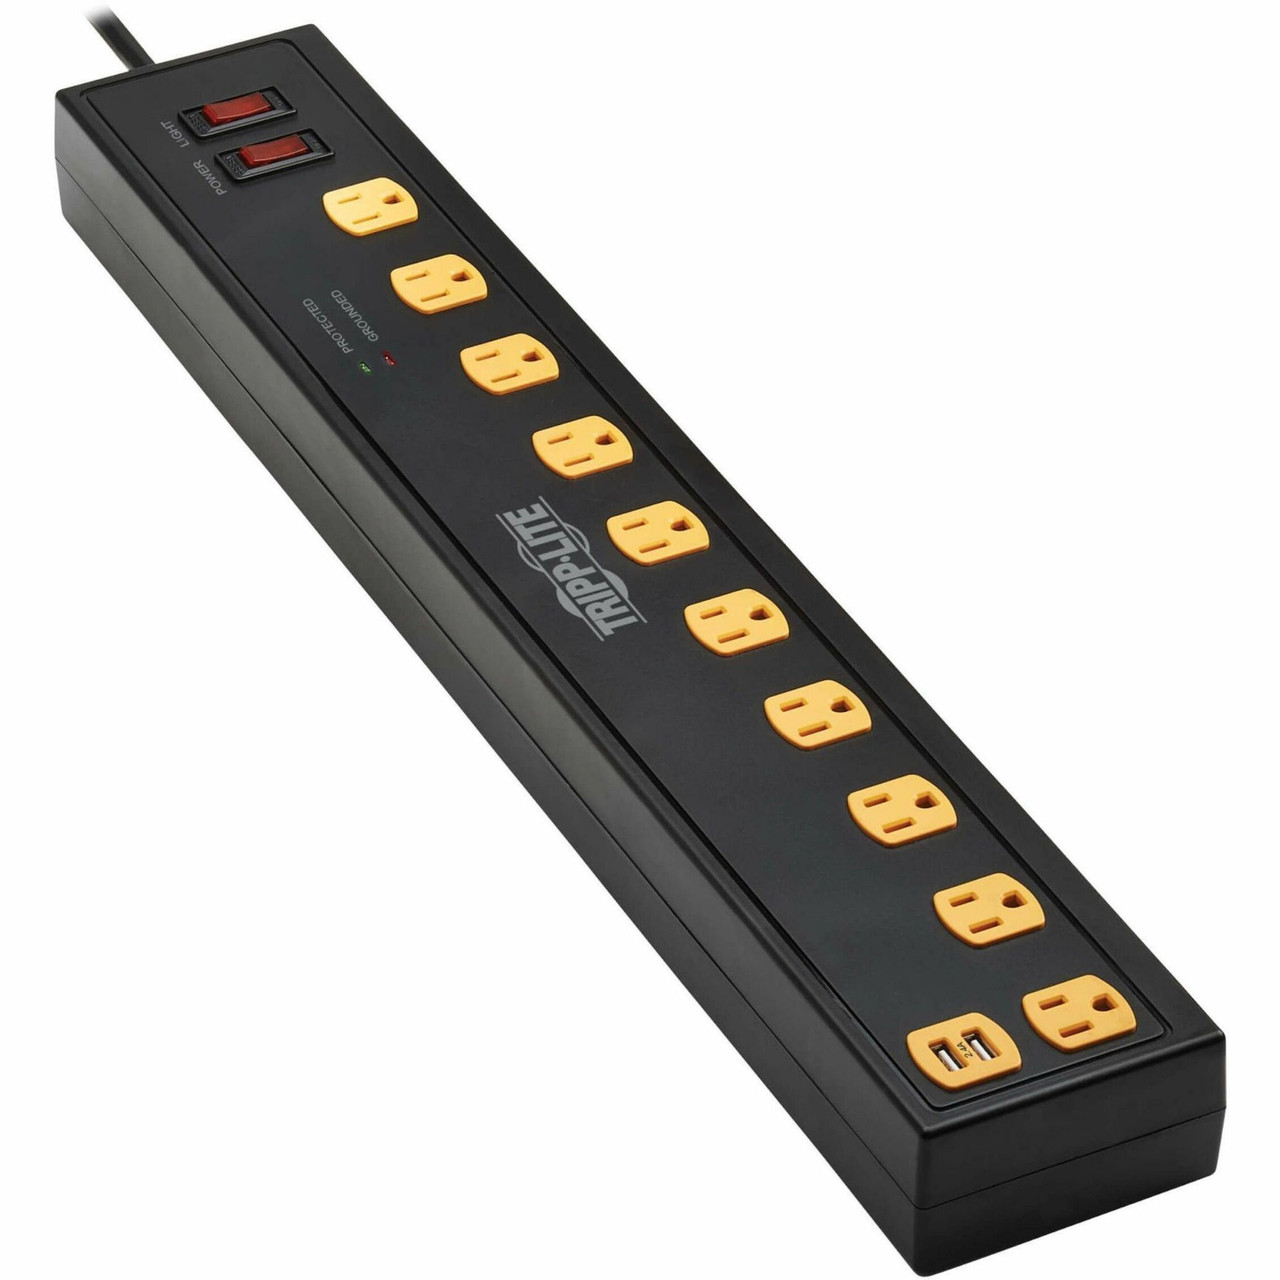 Tripp Lite Protect It! 10-Outlet Surge Protector with Swivel Light Bars - 5-15R Outlets, 2 USB Ports, 6 ft. (1.8 m) Cord, 1350 Joules, Black - TLP1006USB